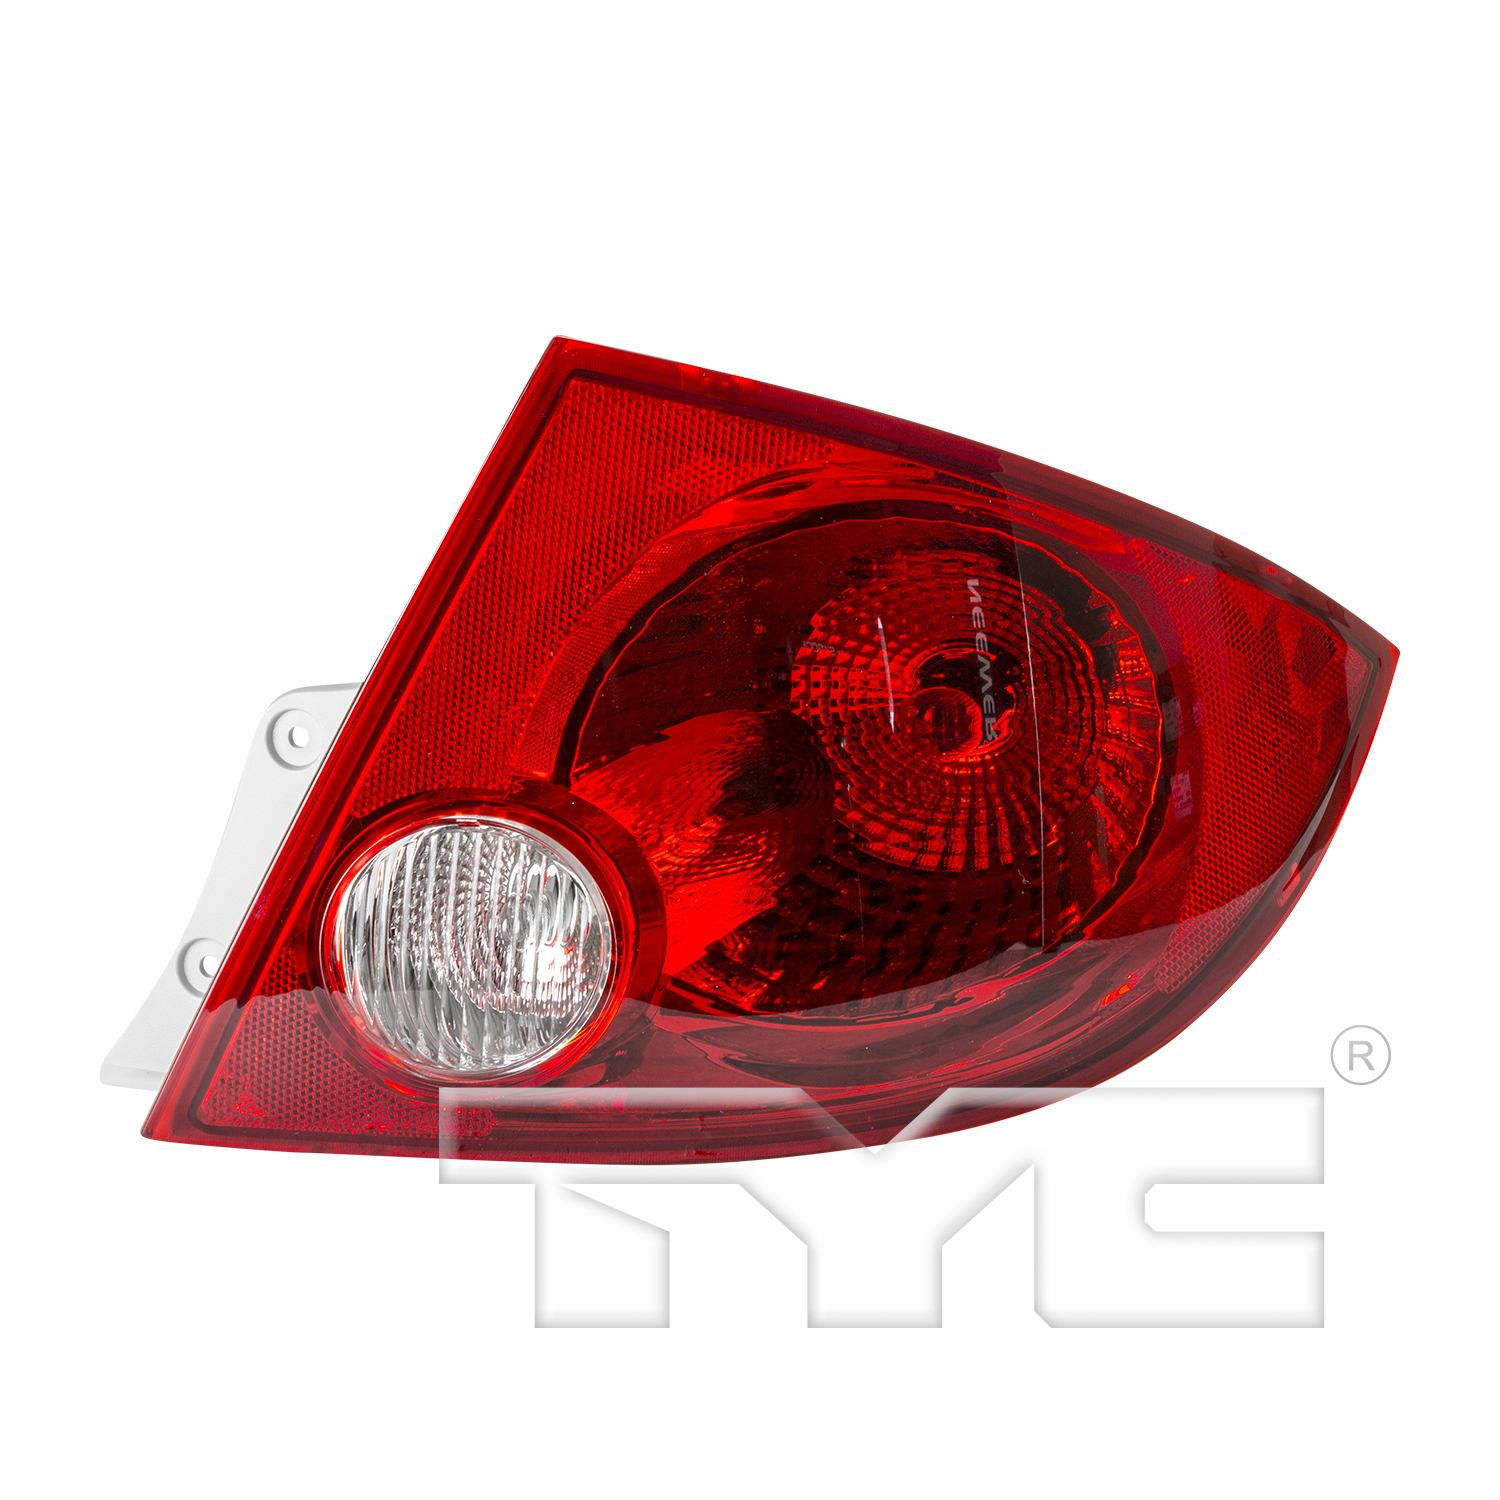 Aftermarket TAILLIGHTS for CHEVROLET - COBALT, COBALT,05-10,RT Taillamp assy